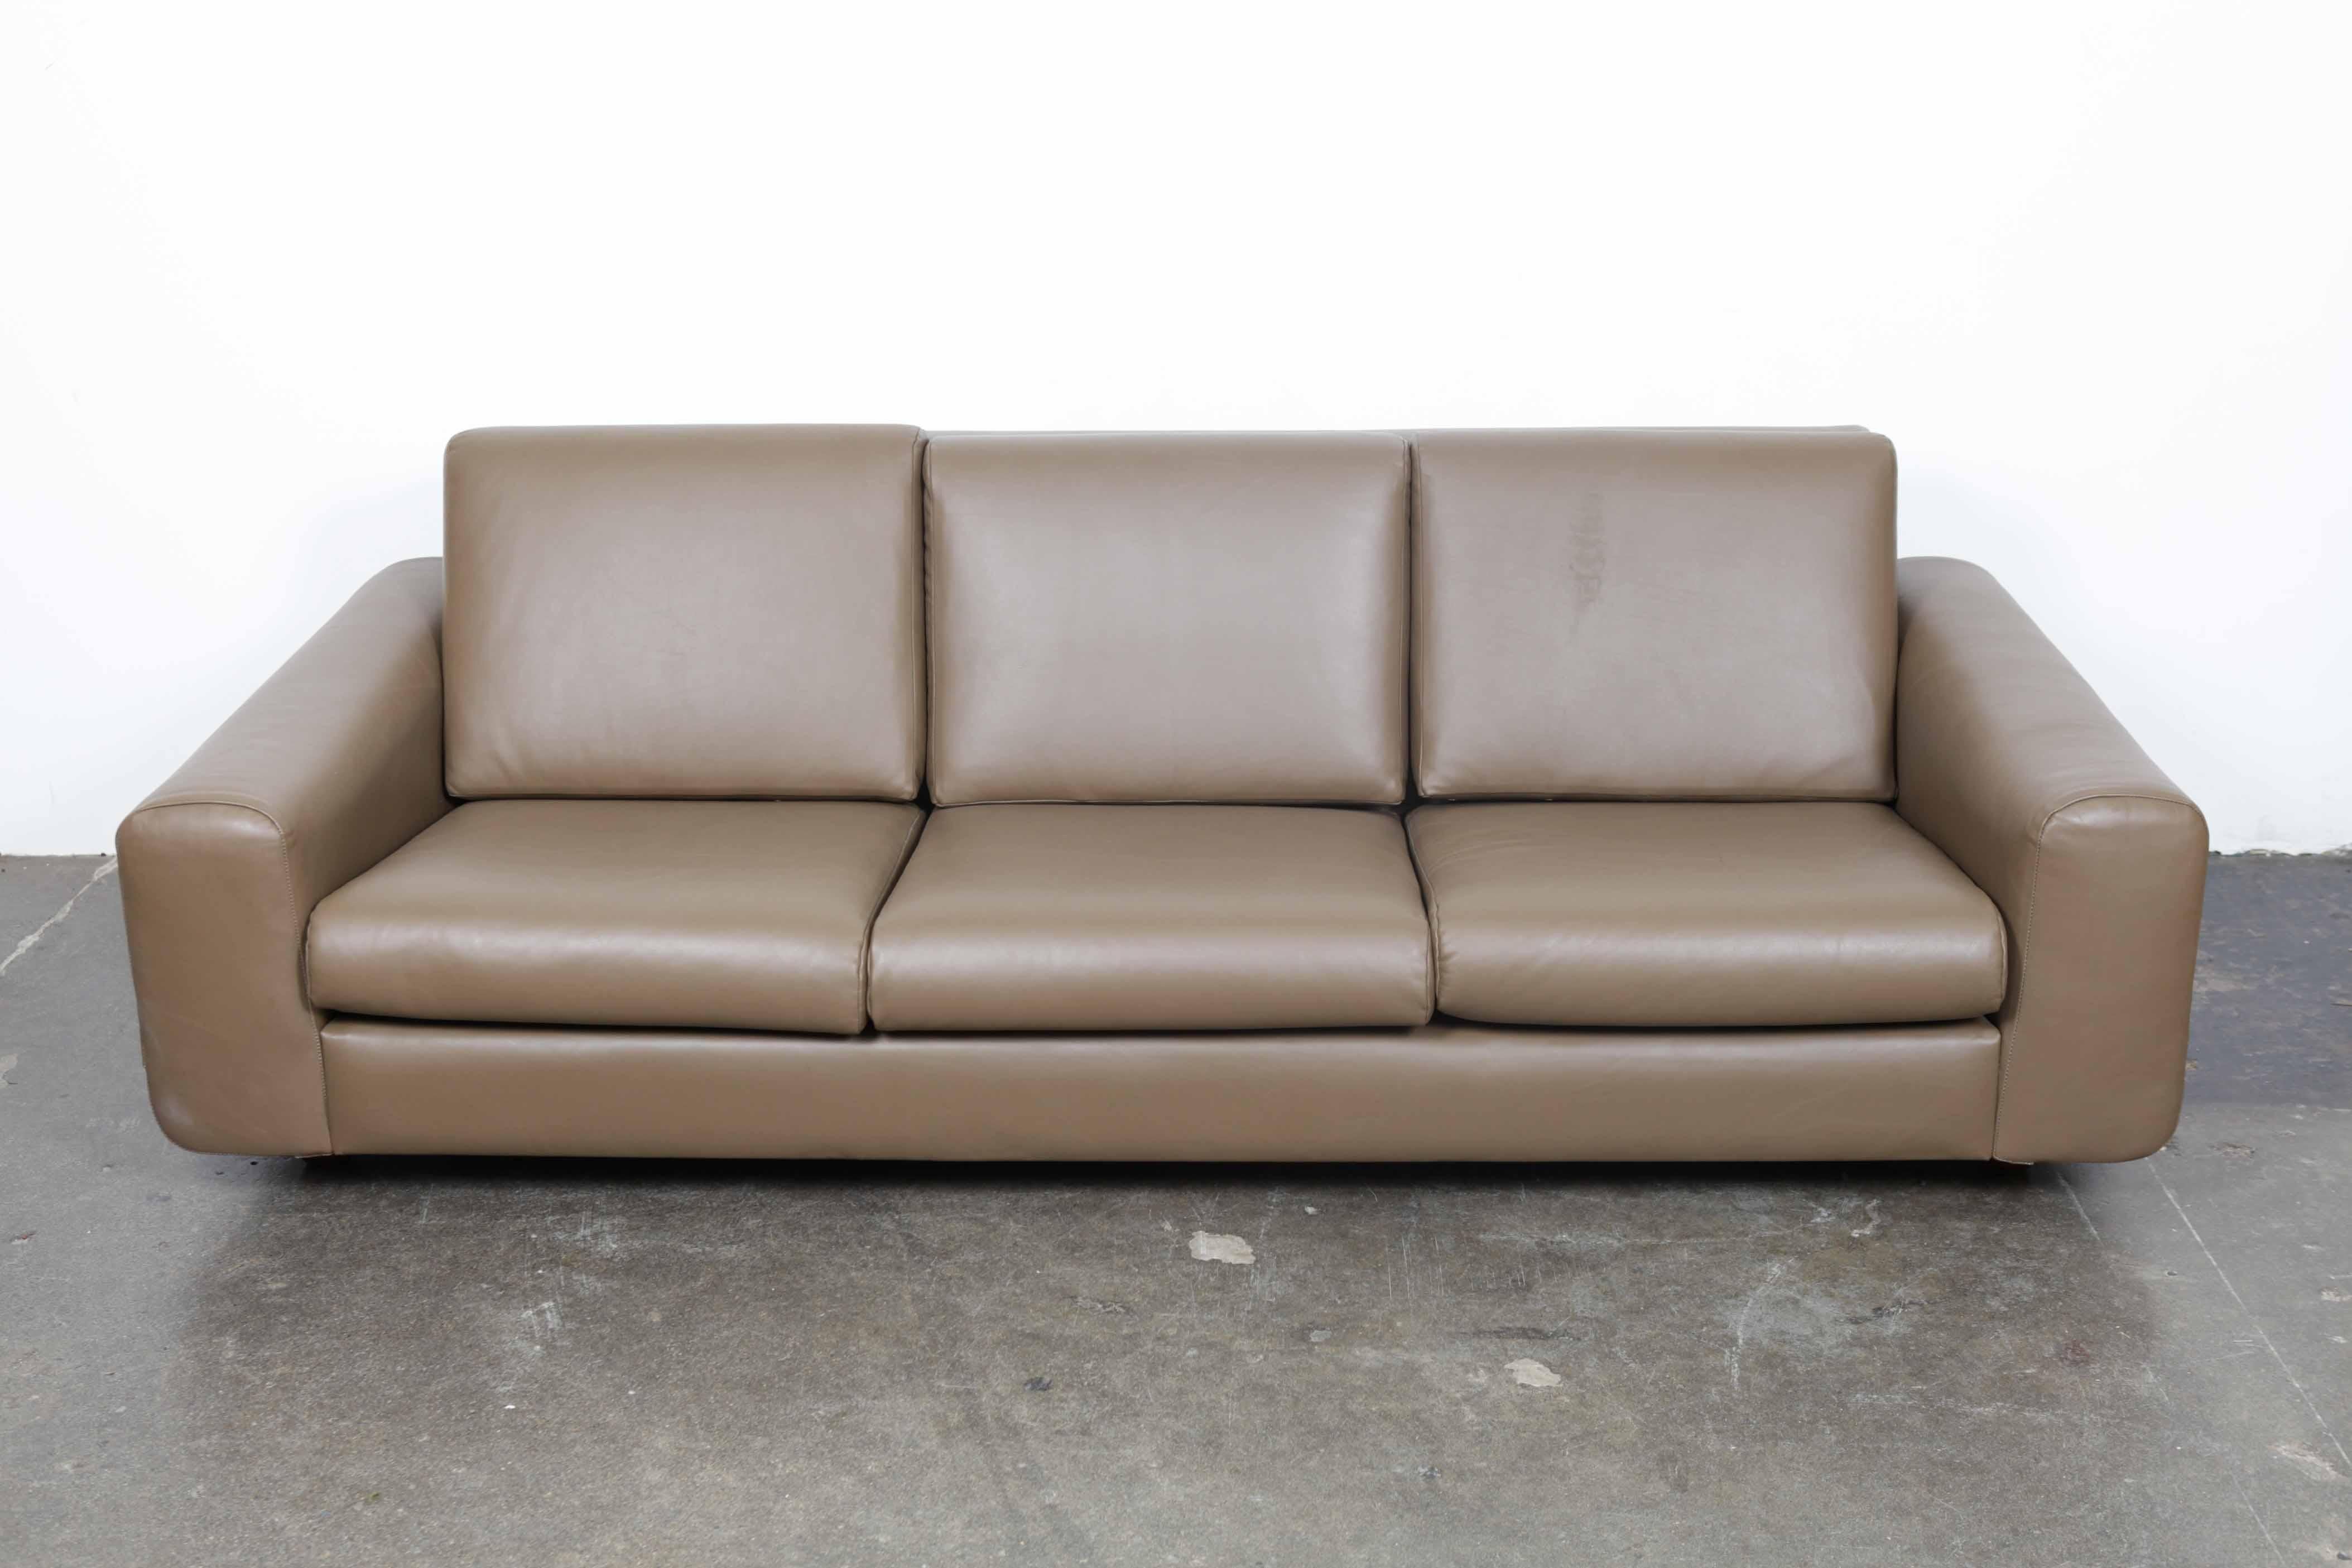 Brazilian 1970s 3-seat sofa with bent rosewood curved side frame, loose cushions and low profile. Newly upholstered in a soft grey toned leather. Rosewood has been refinished.